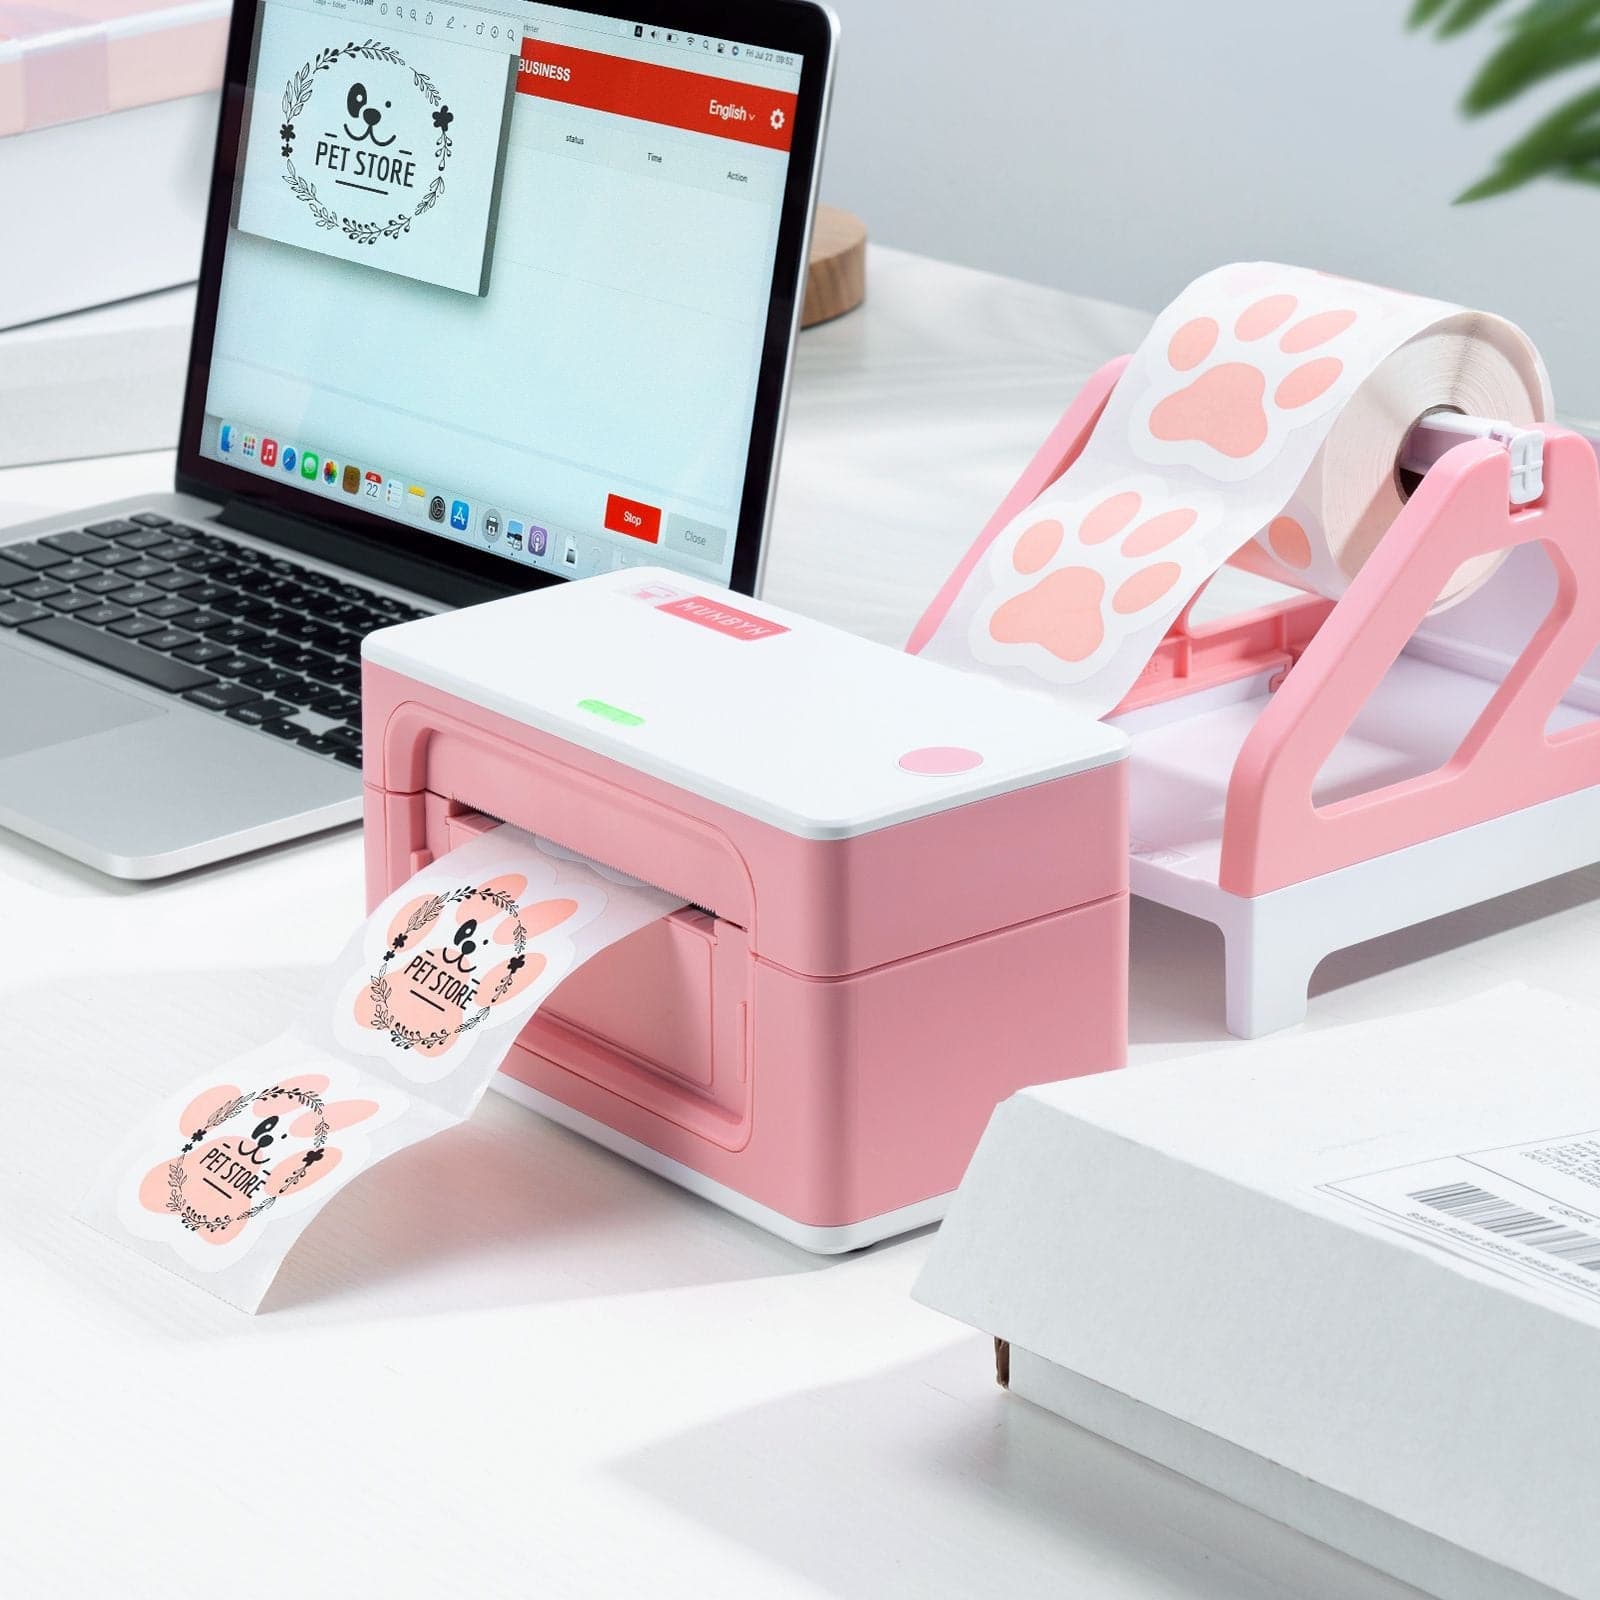 Create personalized paw print stickers using a MUNBYN thermal label printer.